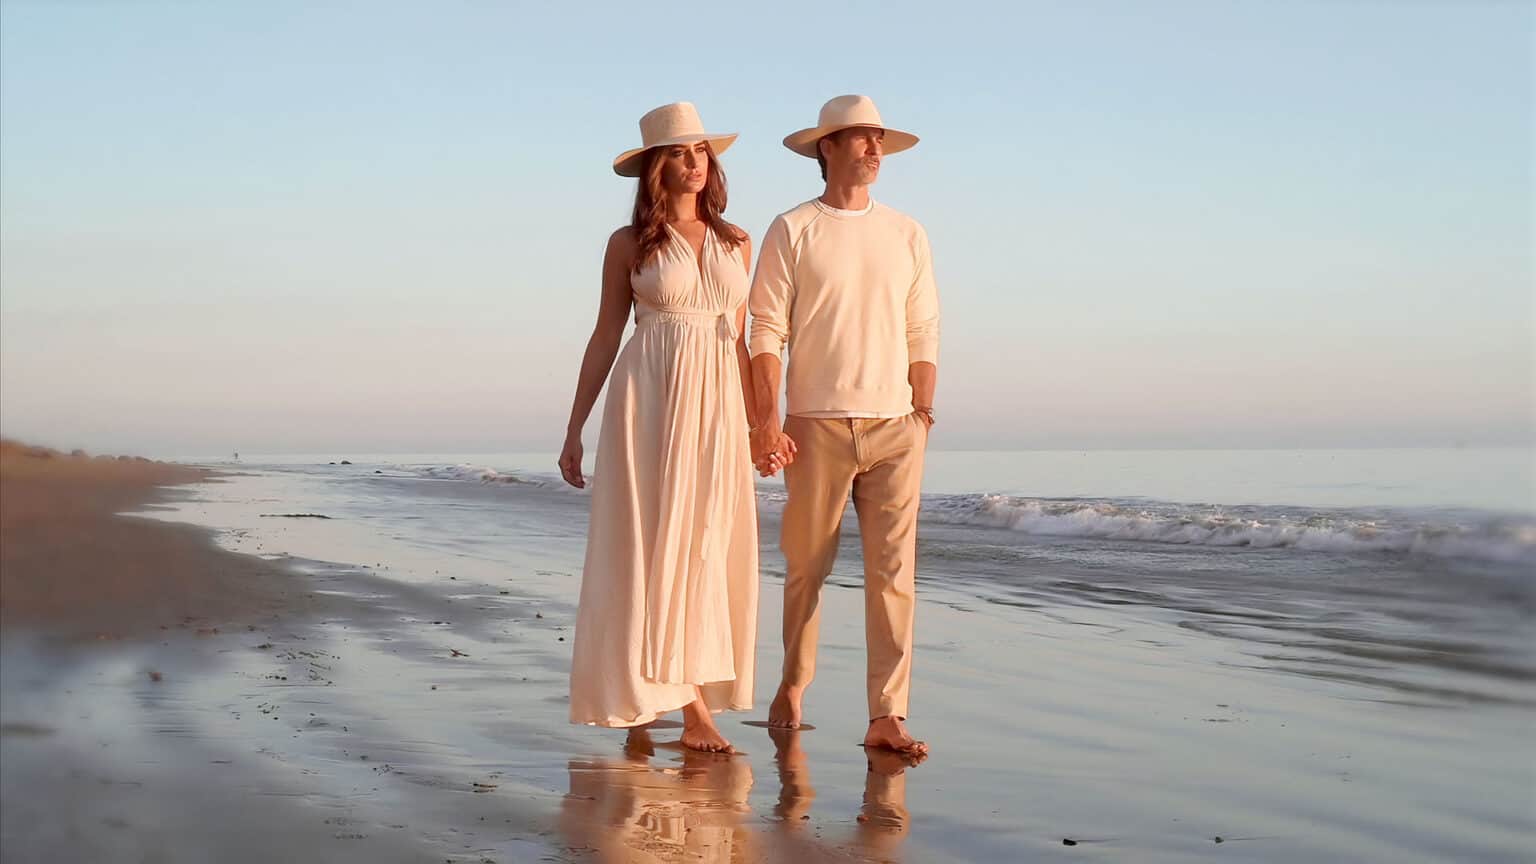 A couple walking down a beach at sunset.